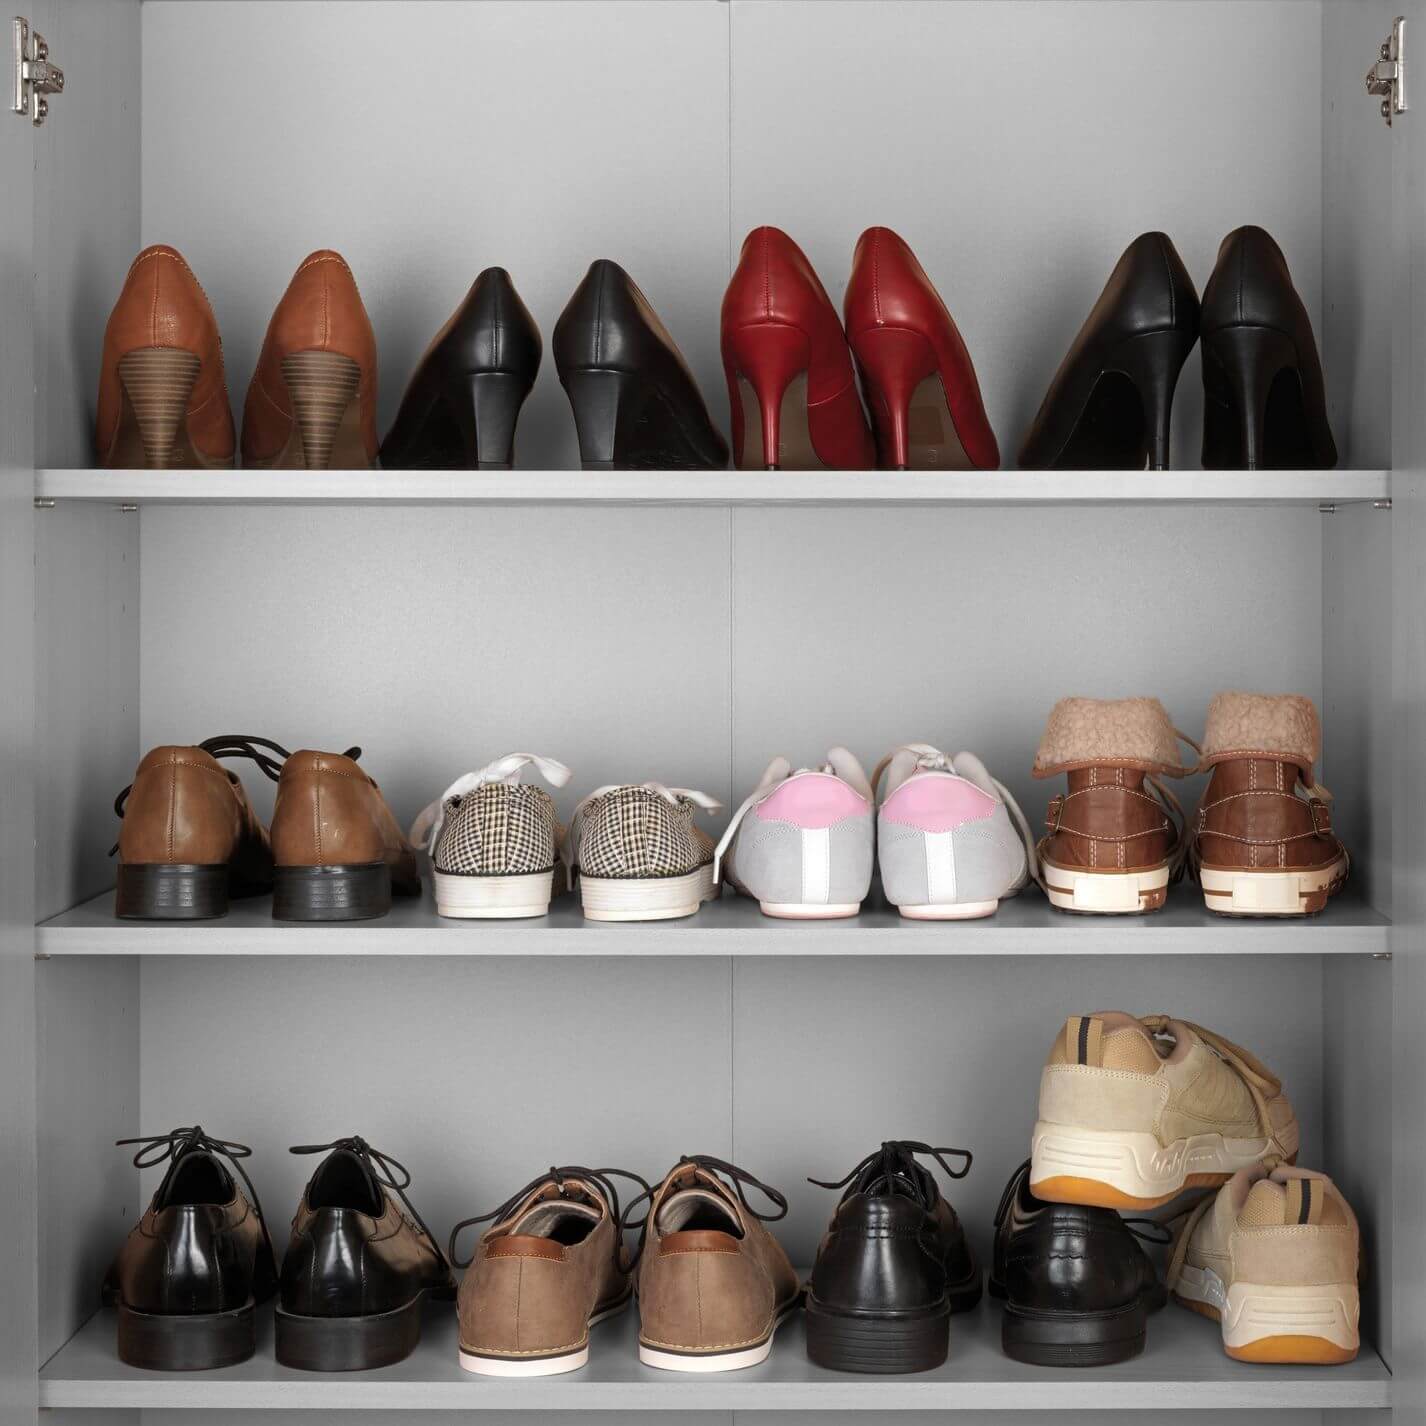 Pairs of shoes stored on white cupboard shelves